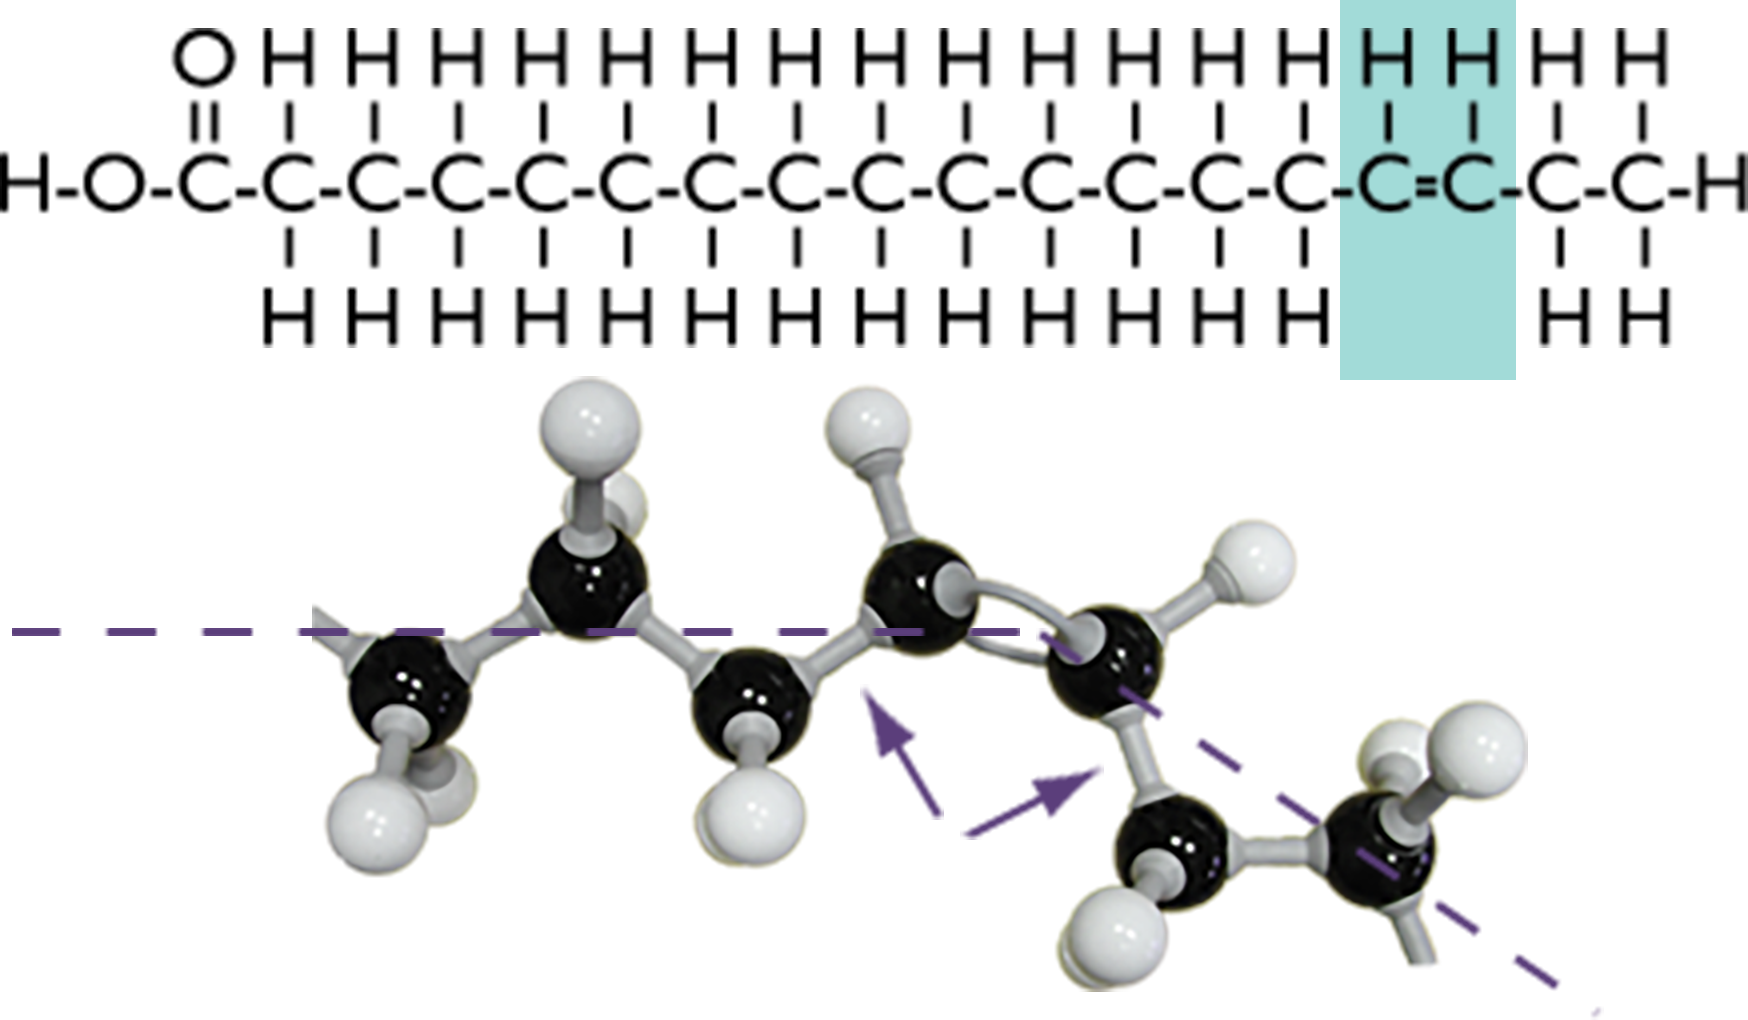 The chemical bonds of cis-unsaturated fatty acid with the carbon-carbon double bonds highlighted plus its molecular structure with a dashed line through the mid-line of the molecule and arrows marking carbon-carbon bonds adjacent to double bonds.